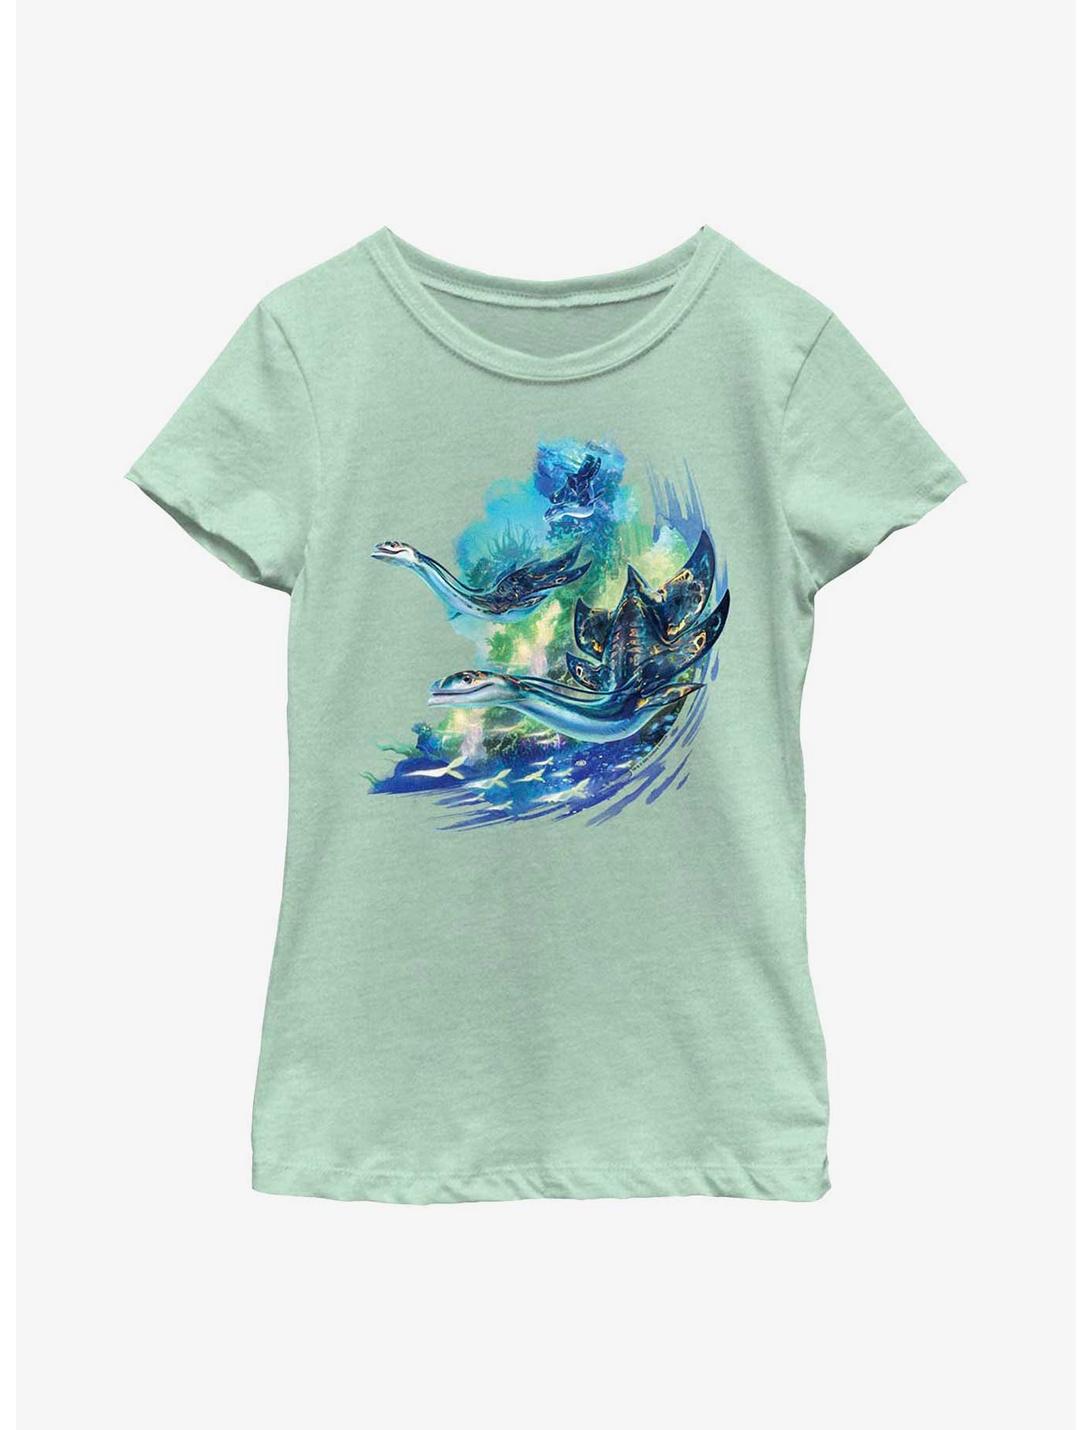 Avatar: The Way Of The Water Ilu Creatures Youth Girls T-Shirt, MINT, hi-res